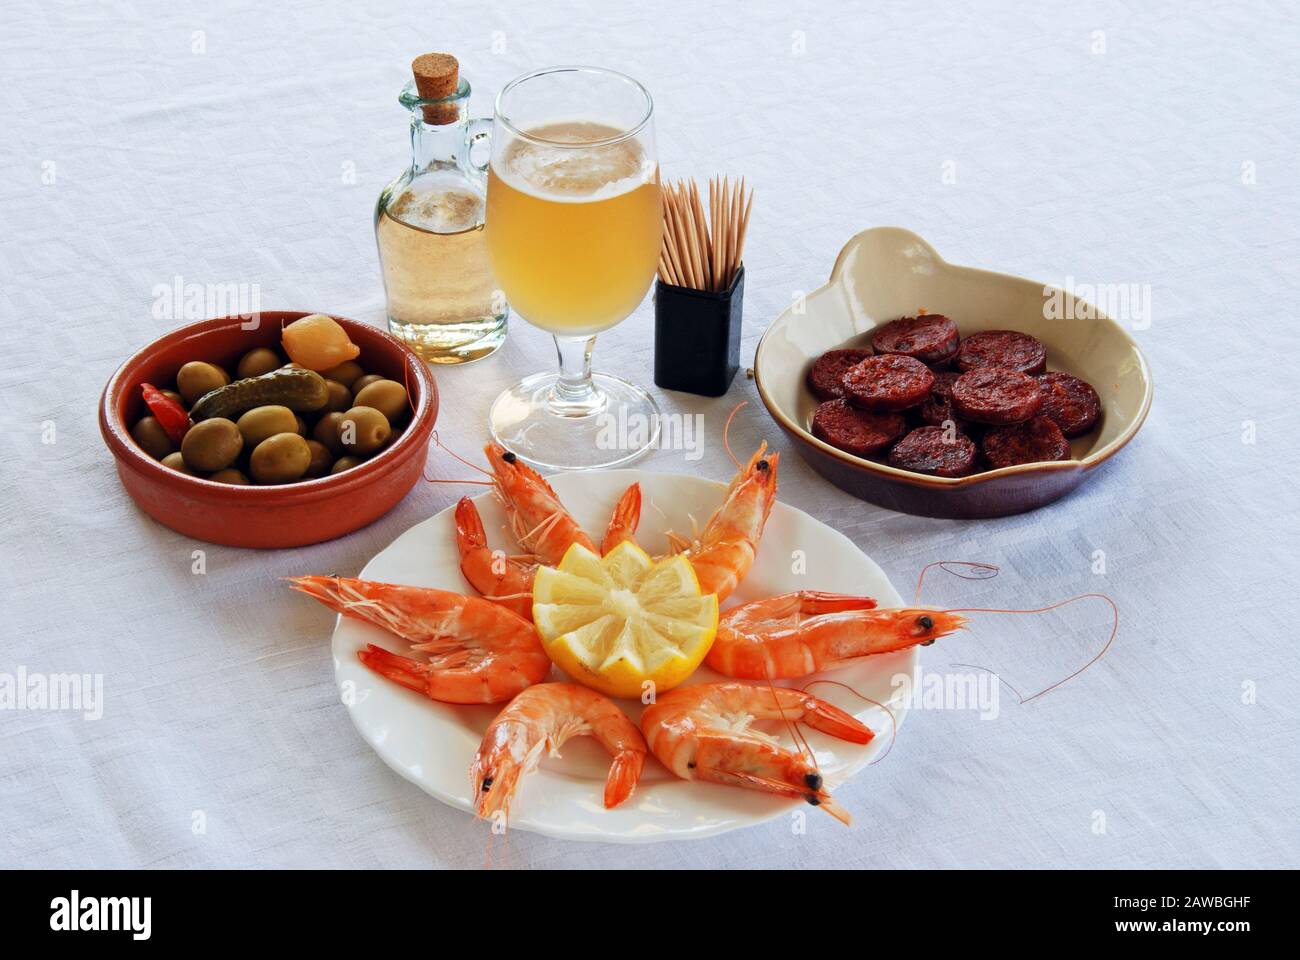 A selection of tapas with beer, King prawns with lemon, Sliced Chorizo sausage, and green olive cocktail, Costa del Sol, Spain. Stock Photo